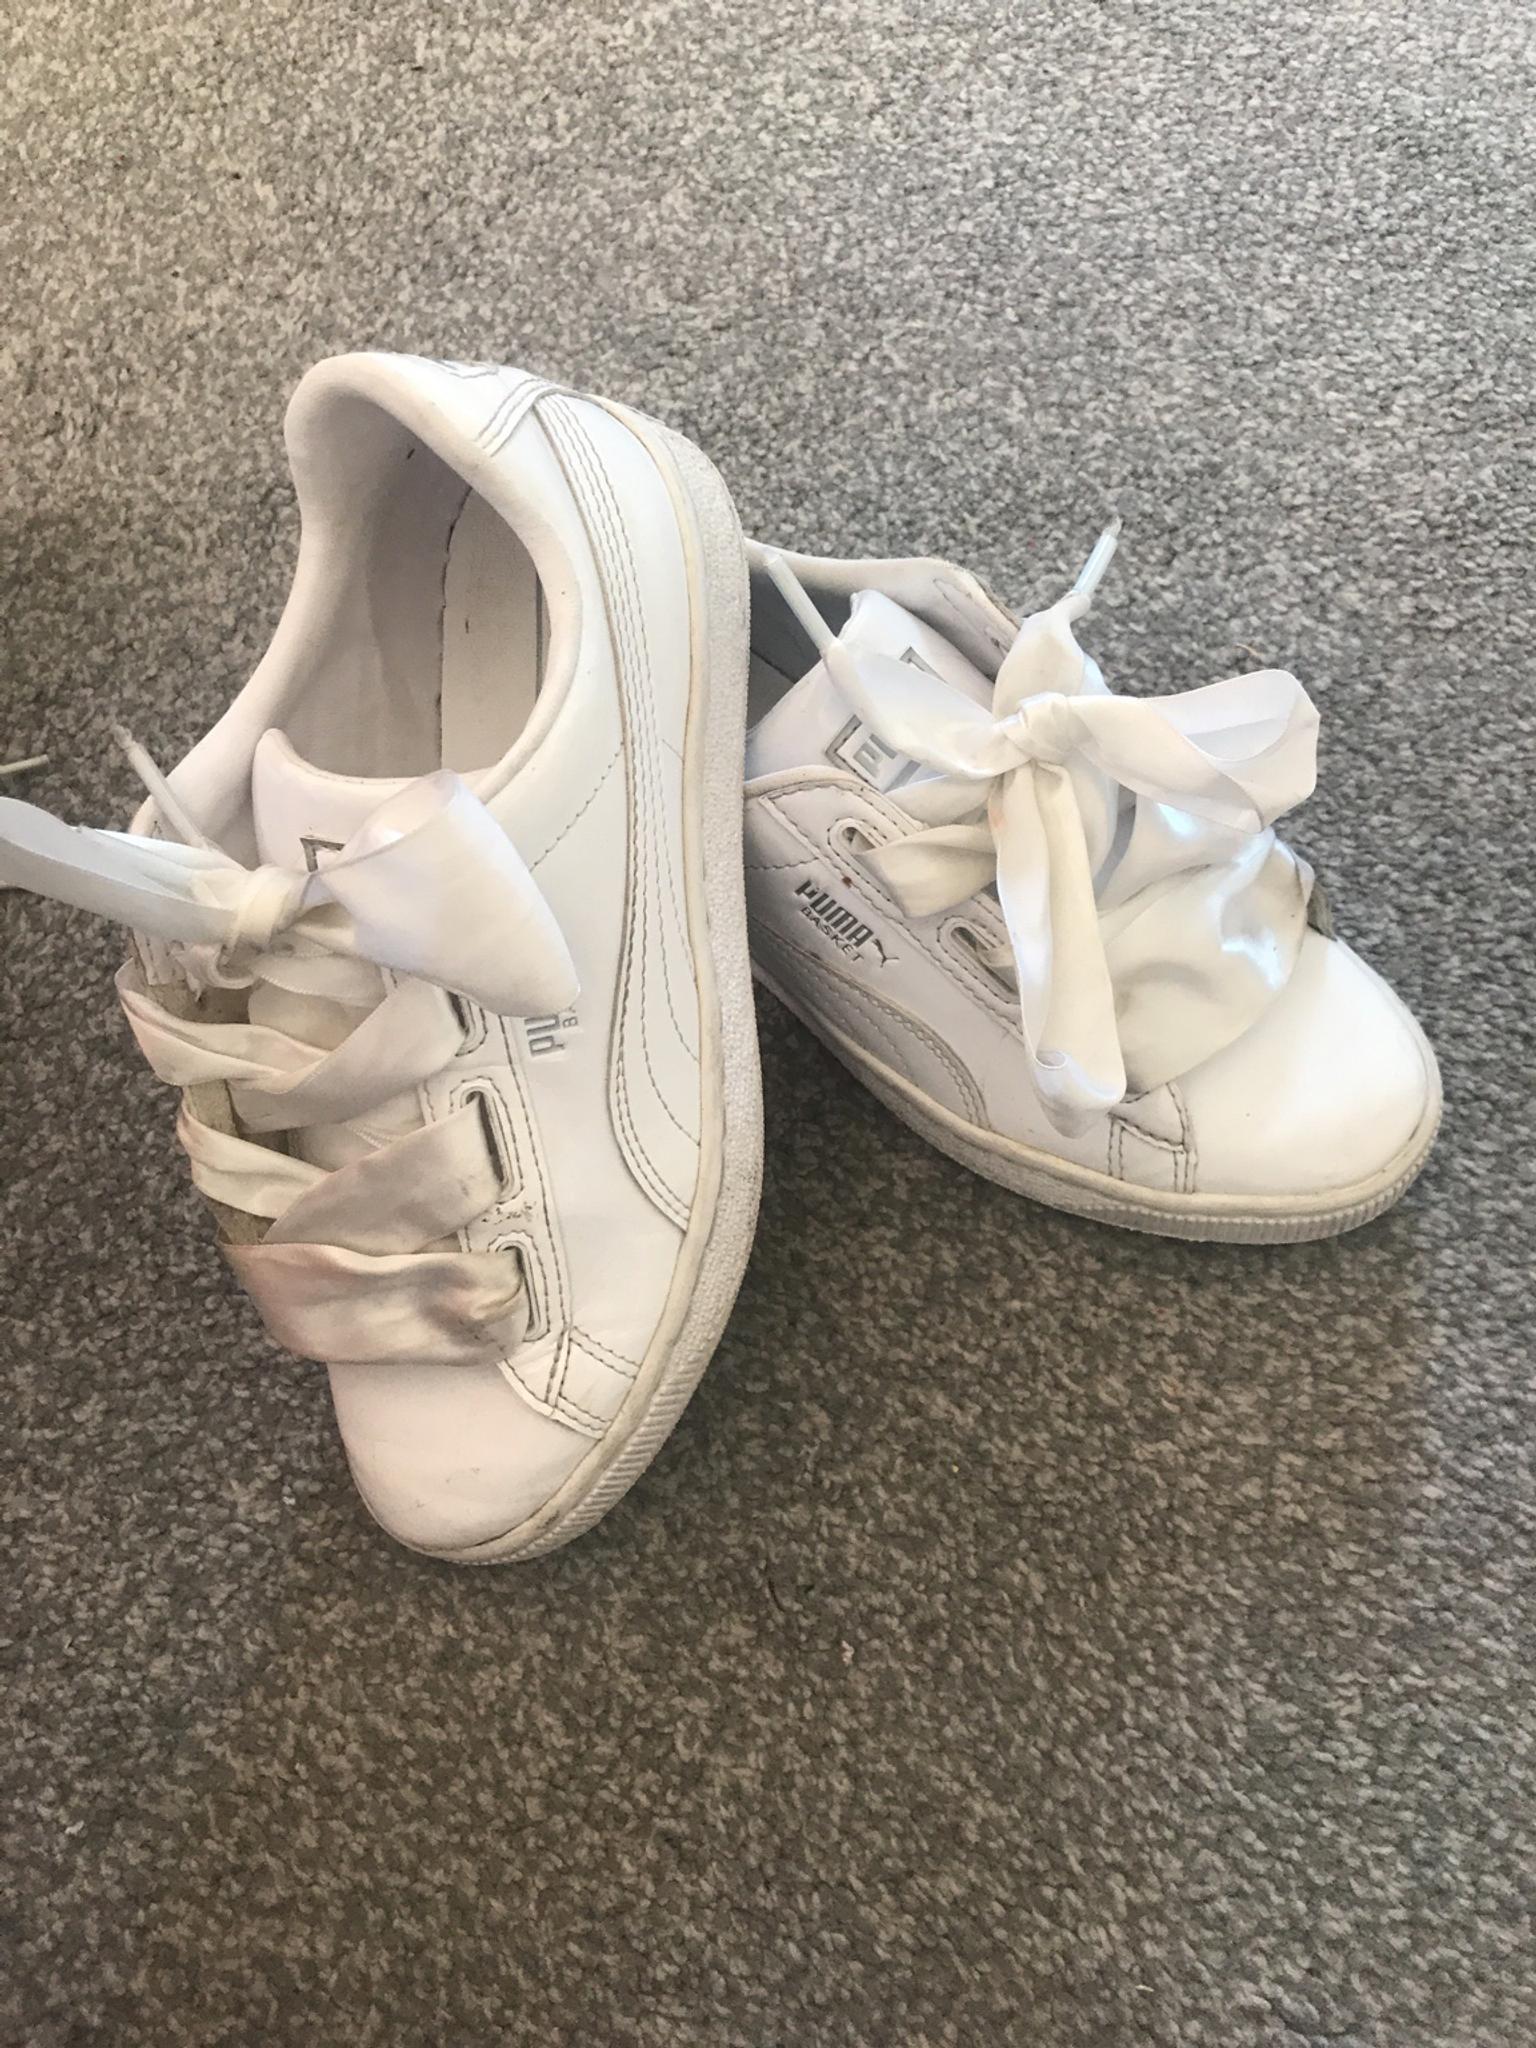 white size 3 trainers